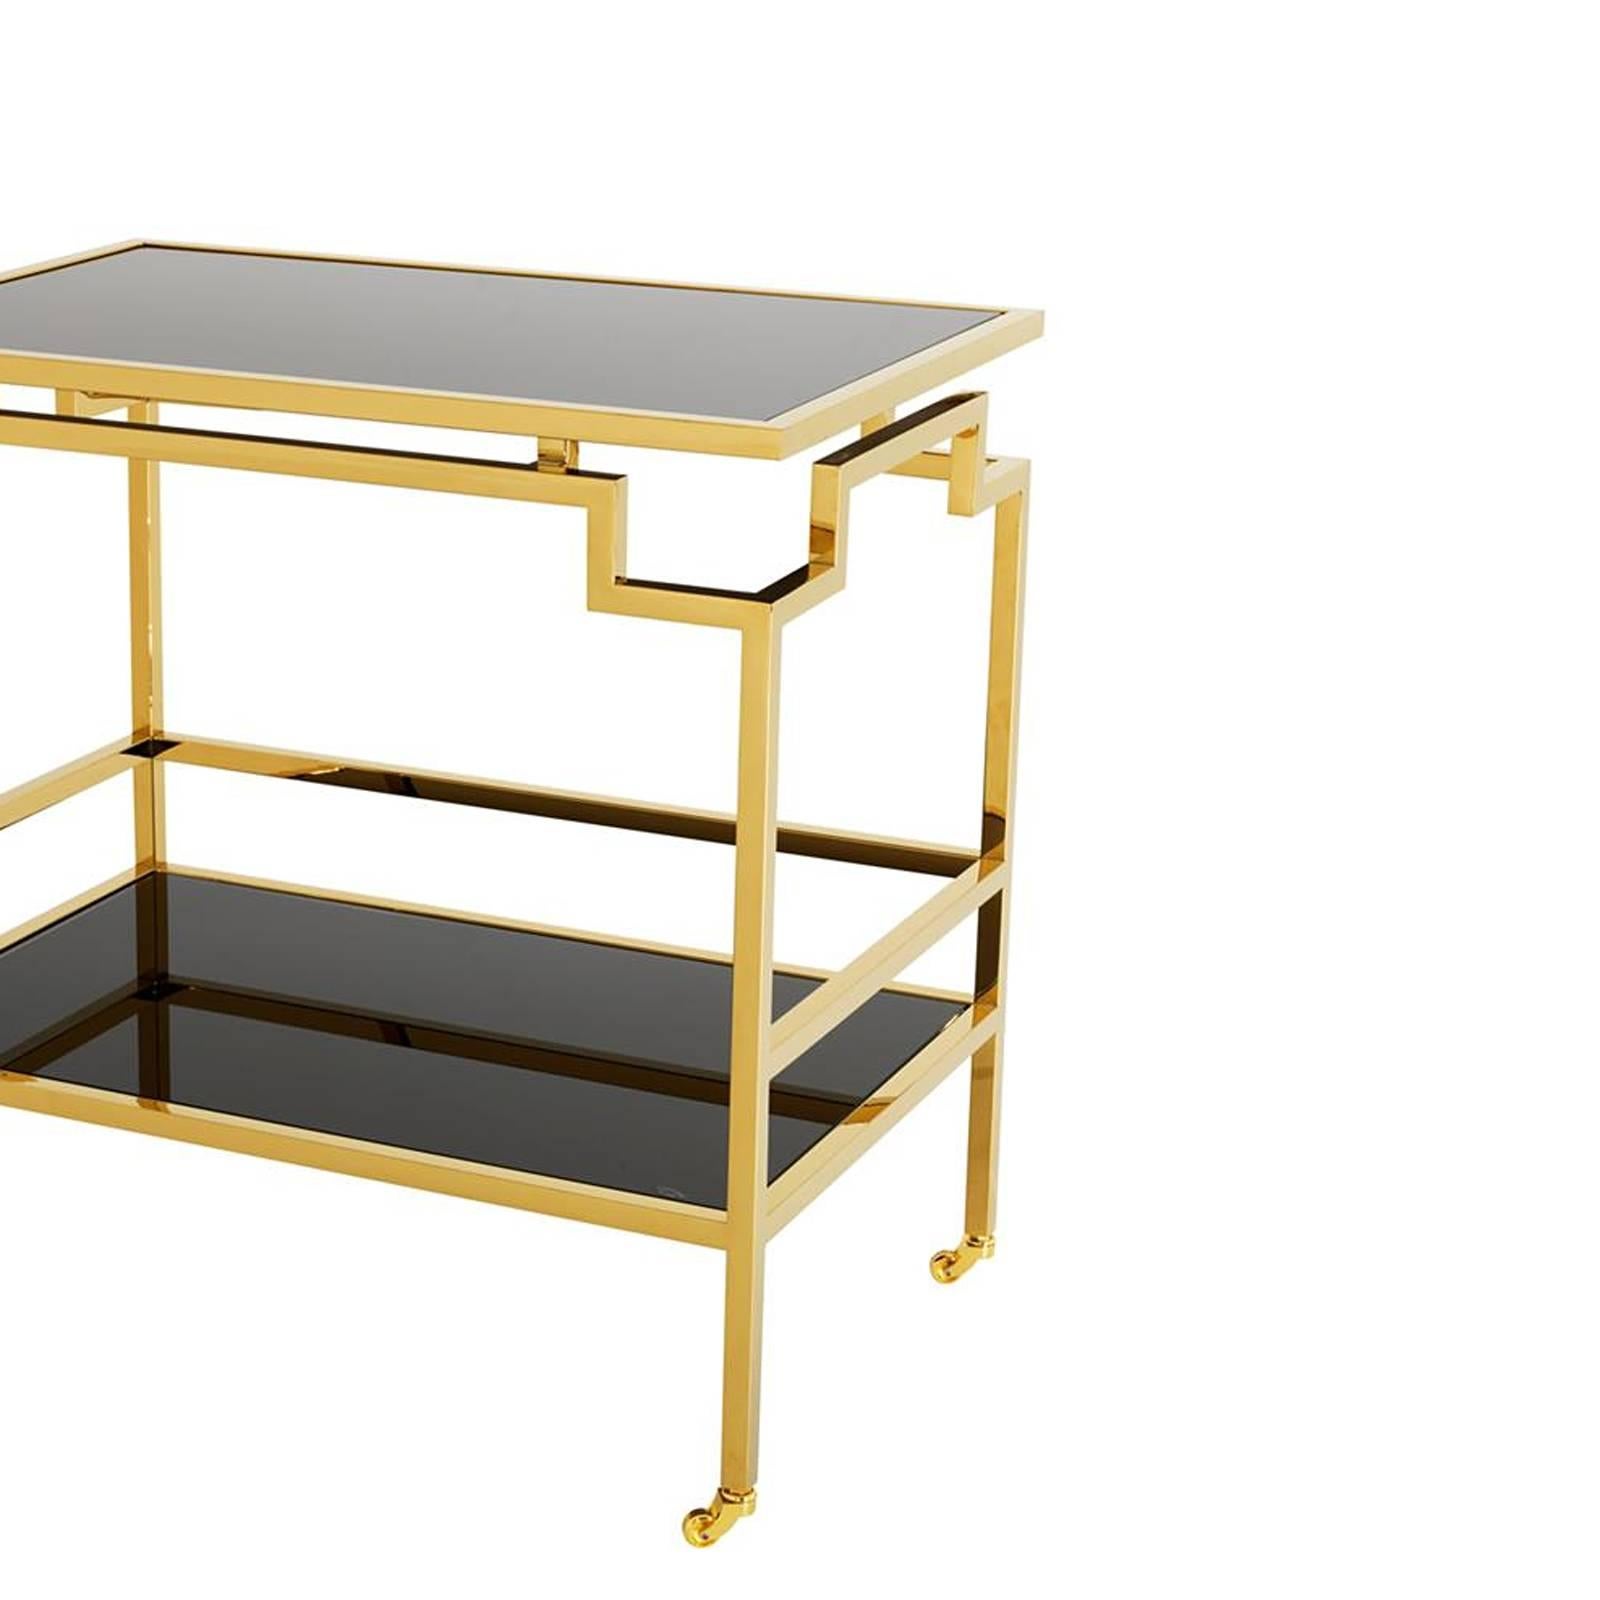 Chinese Angles Trolley in Gold Finish or in Polished Stainless Steel